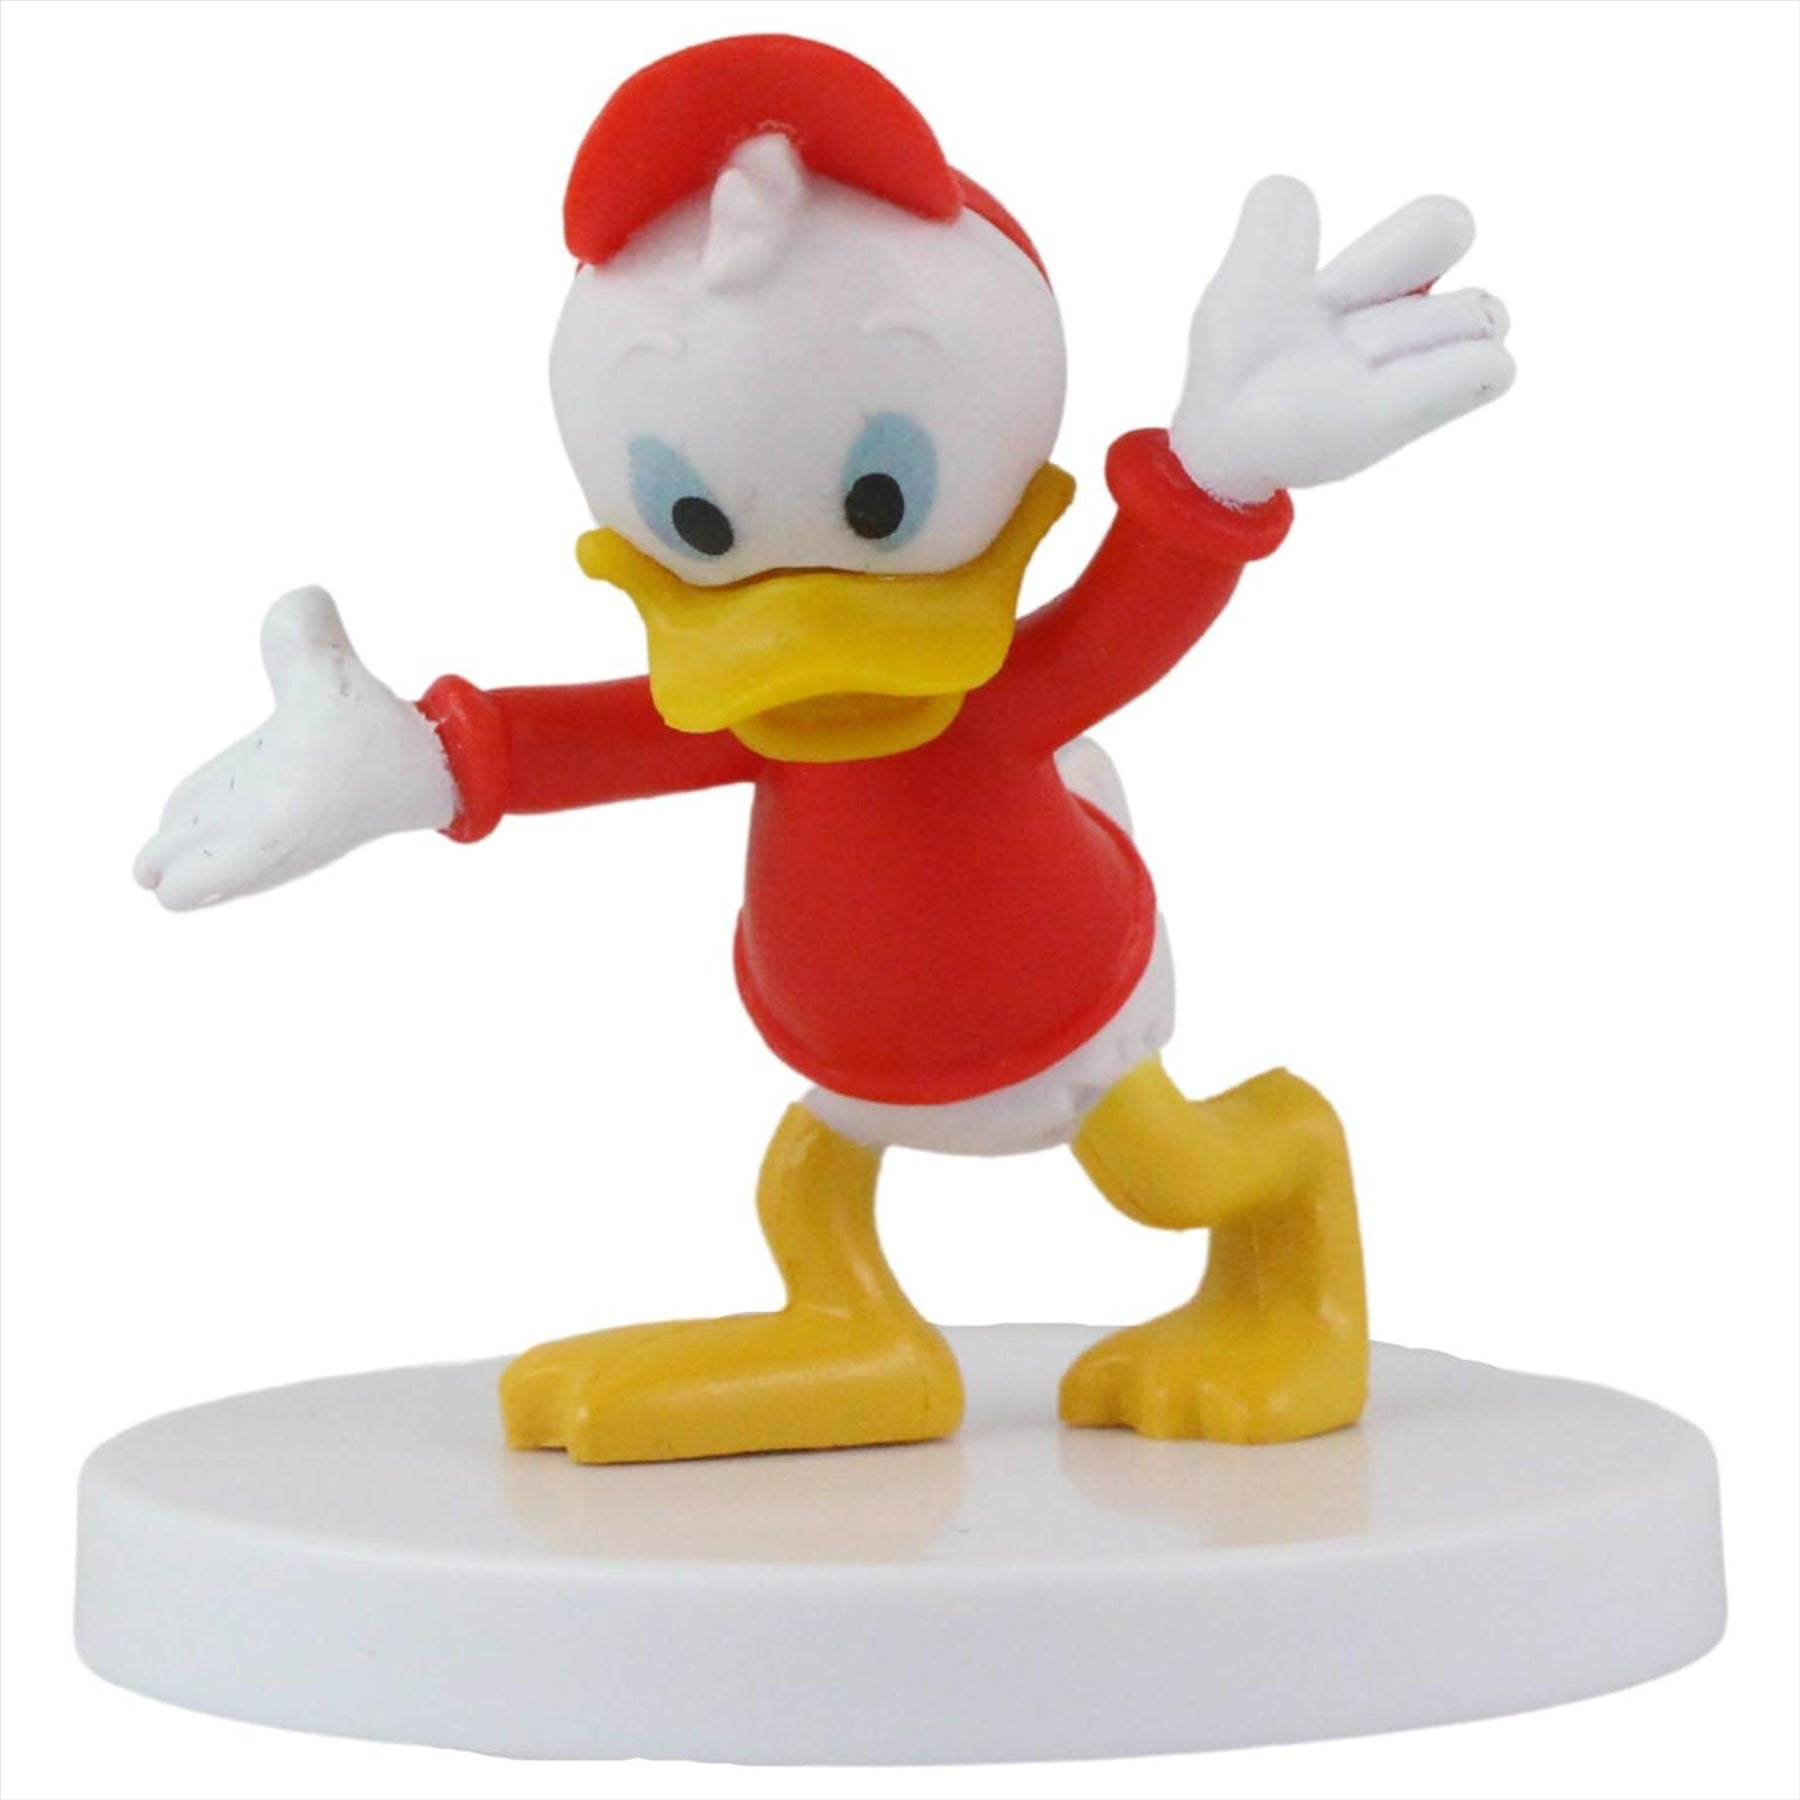 Mickey Mouse and Friends 3D Figures - Perfect Cake Toppers - 2" 5cm Huey, Dewey, Louie Mickey & 2.5" 6cm Scrooge McDuck - 5 Pack - Toptoys2u